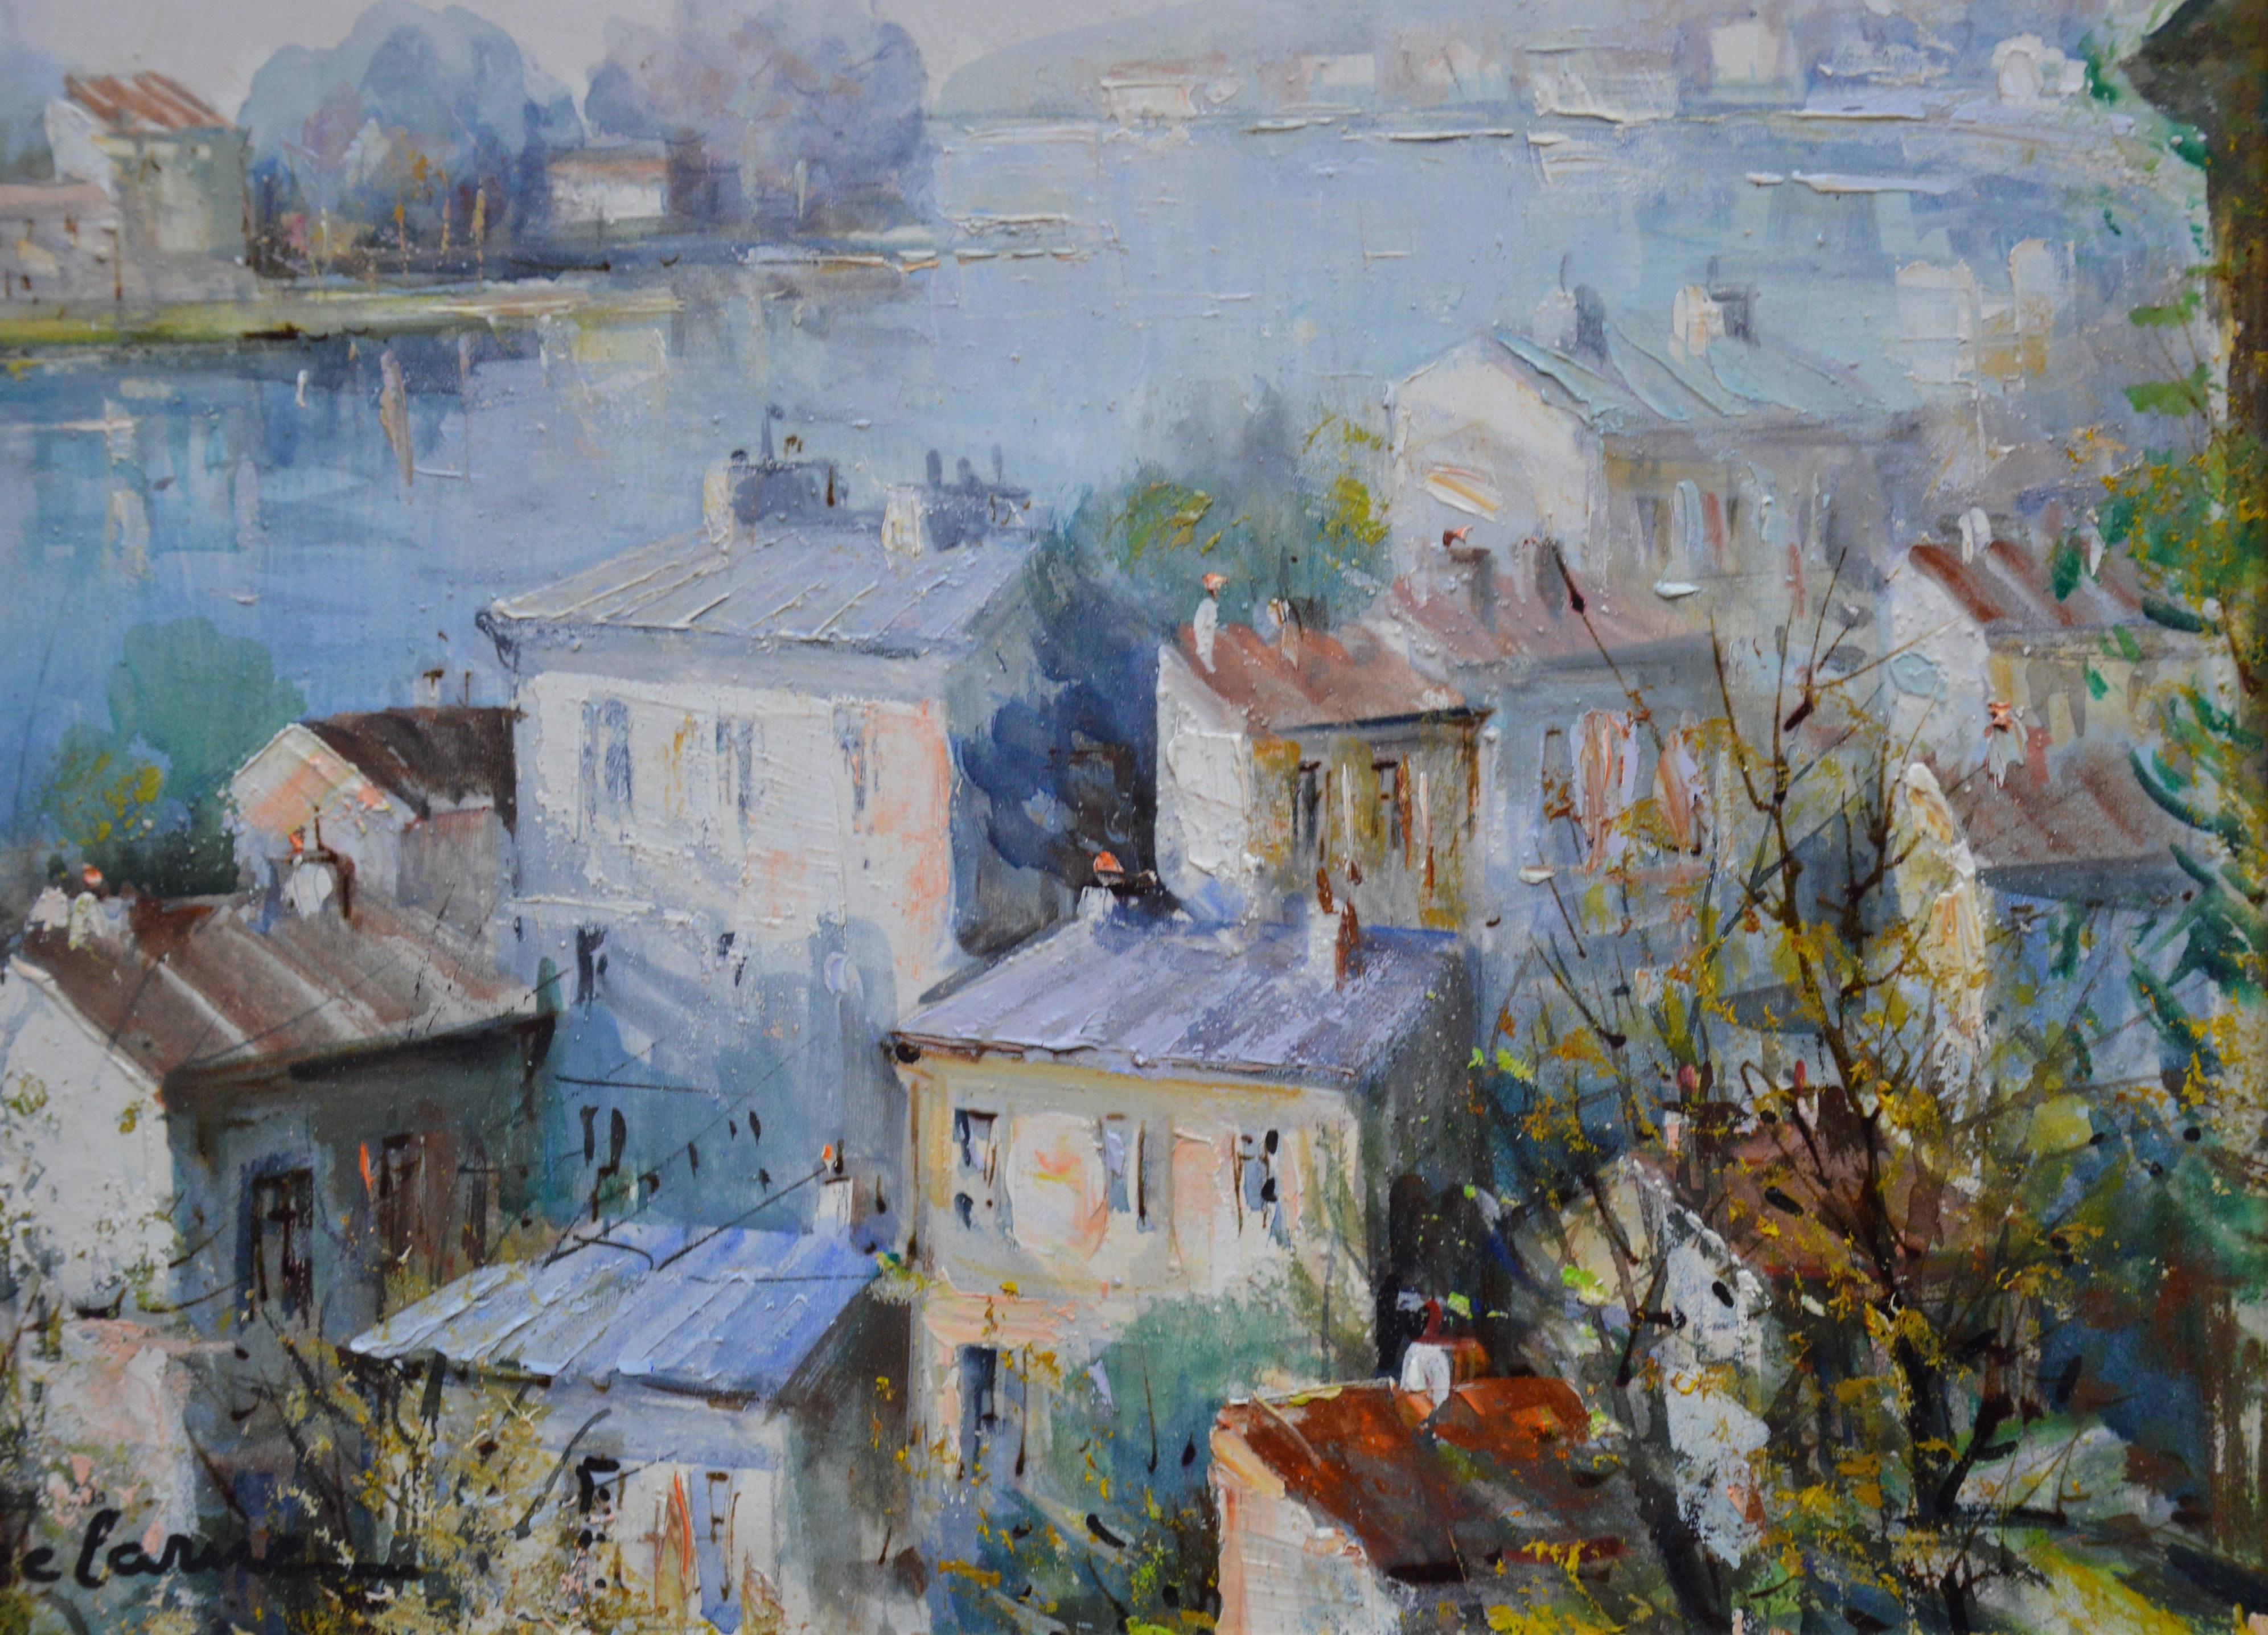 This is a fine French Post-Impressionist landscape oil on canvas depicting the River Seine at the picturesque town of Herblay just north of Paris by the eminent French artist Lucien Delarue (1925-2011). ‘Le Seine à Herblay’ is signed by the artist